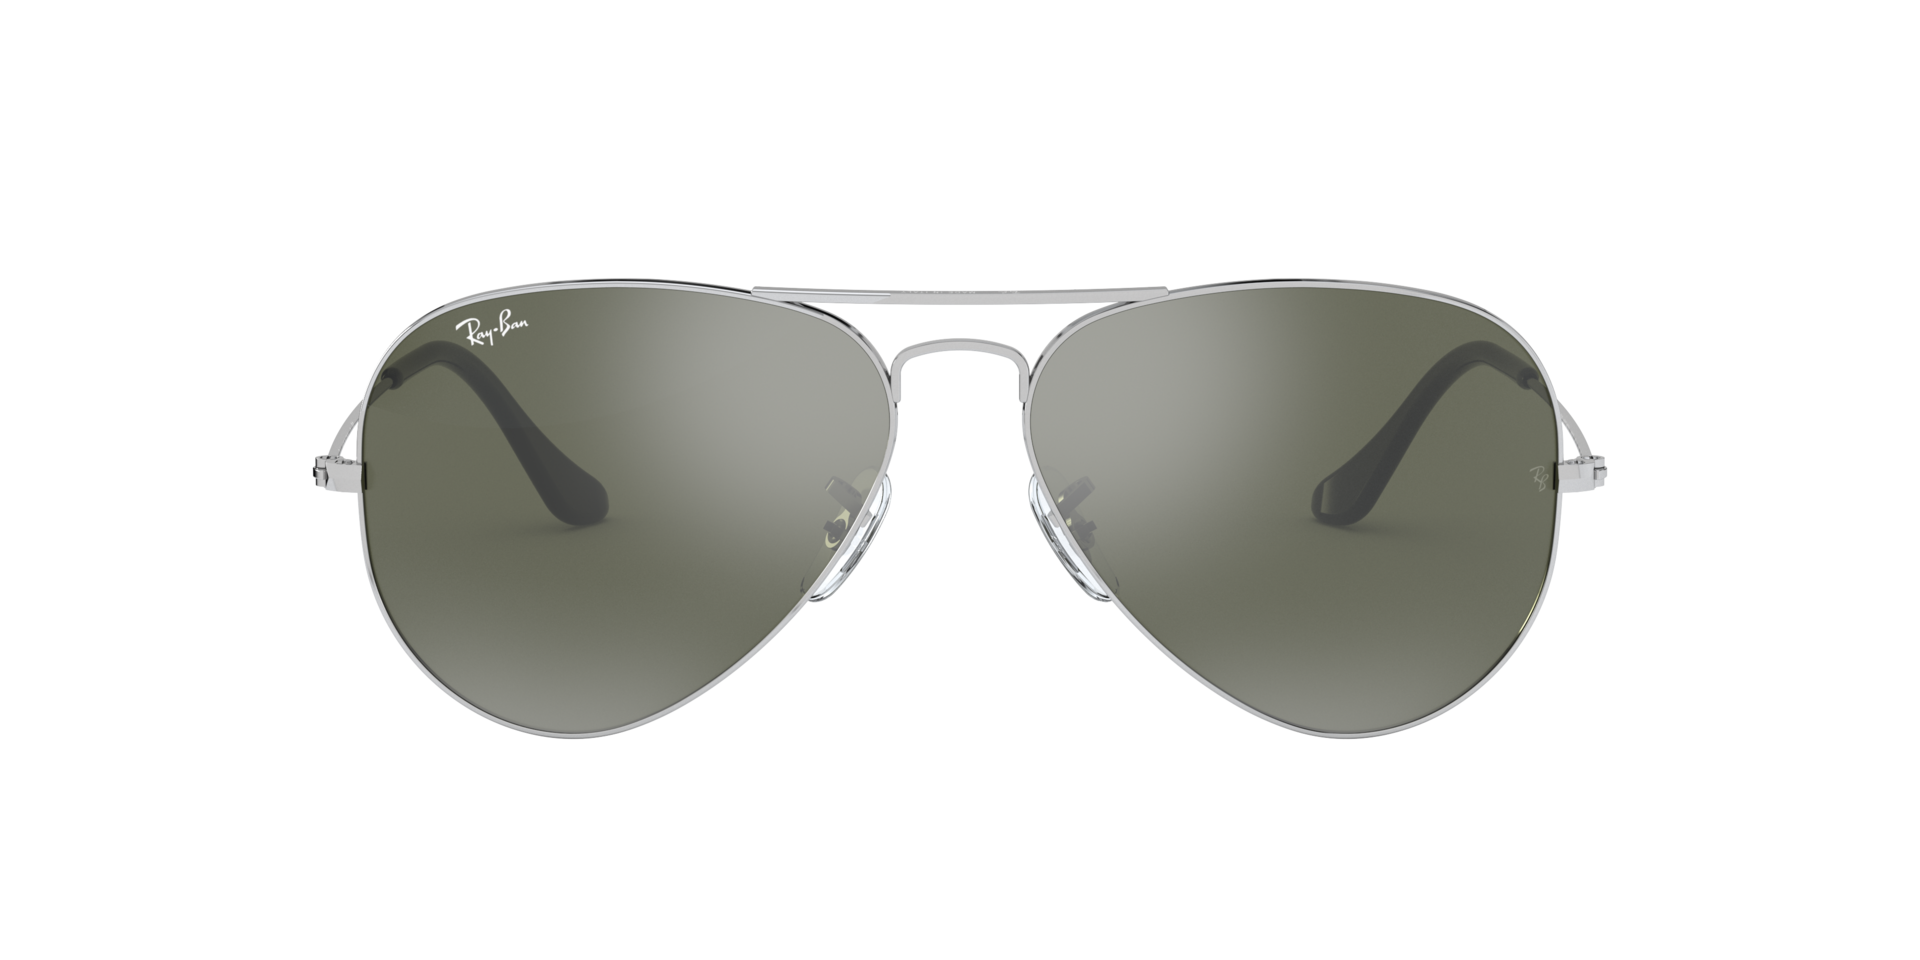 Ray Ban Aviator Large Metal Sonnenbrille RB3025 W3275 55